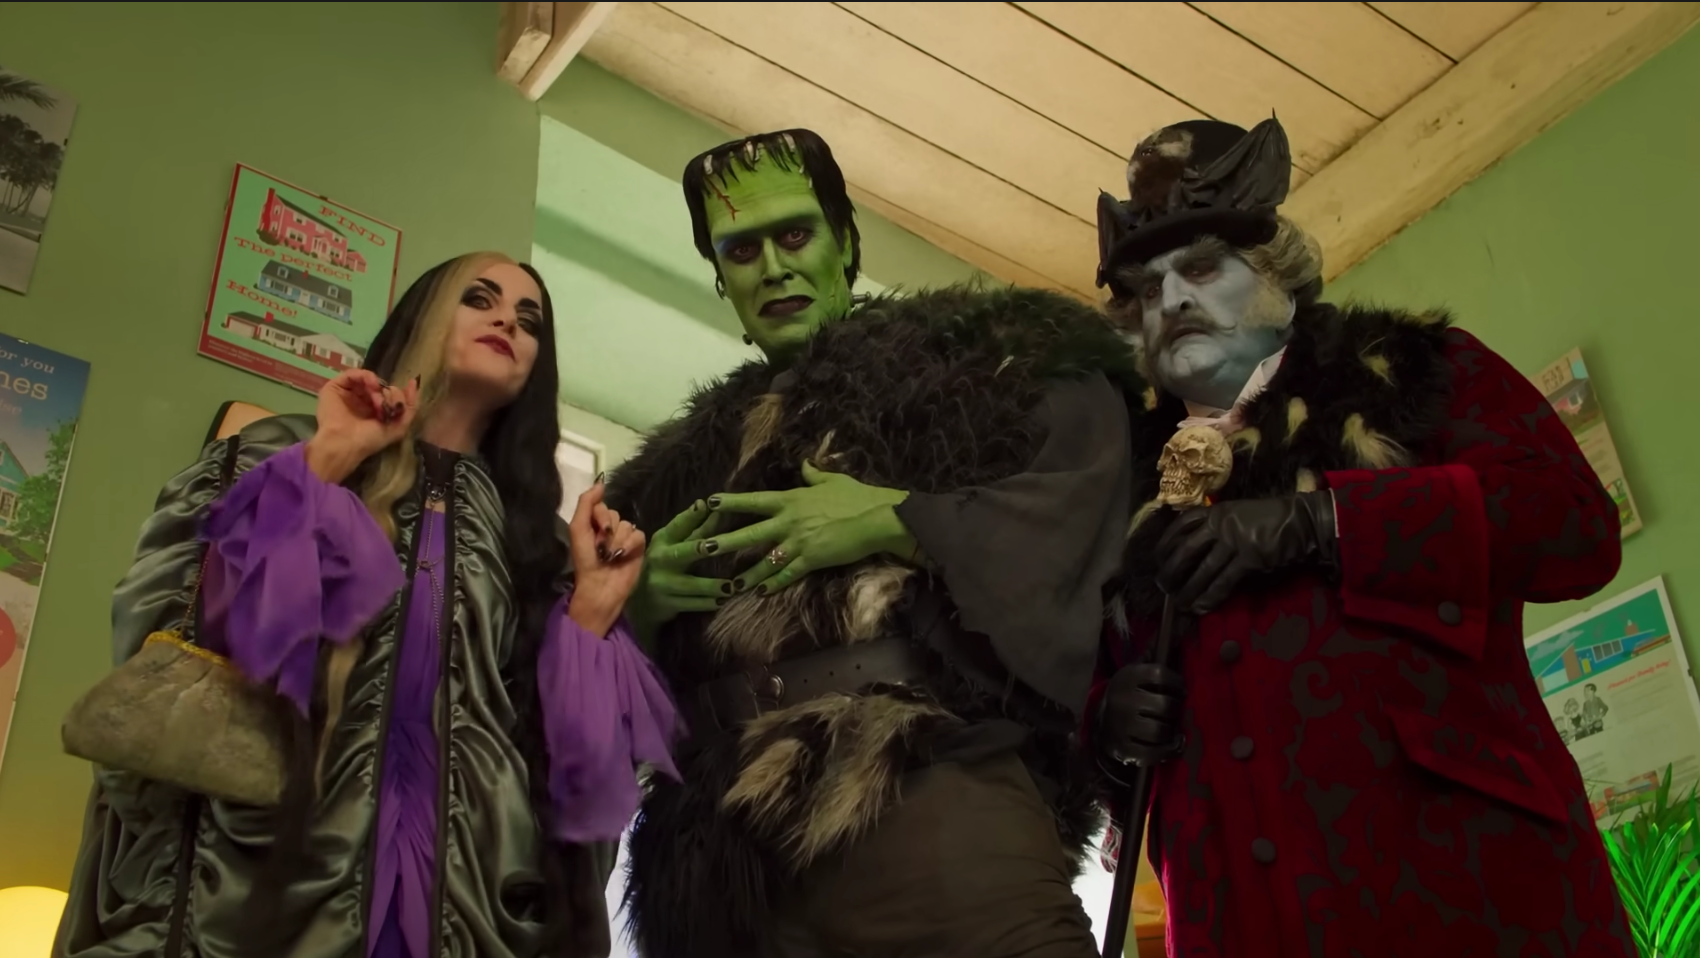 Munsters Porn Movie - Rob Zombie's Munsters movie trailer has left fans with the same complaints